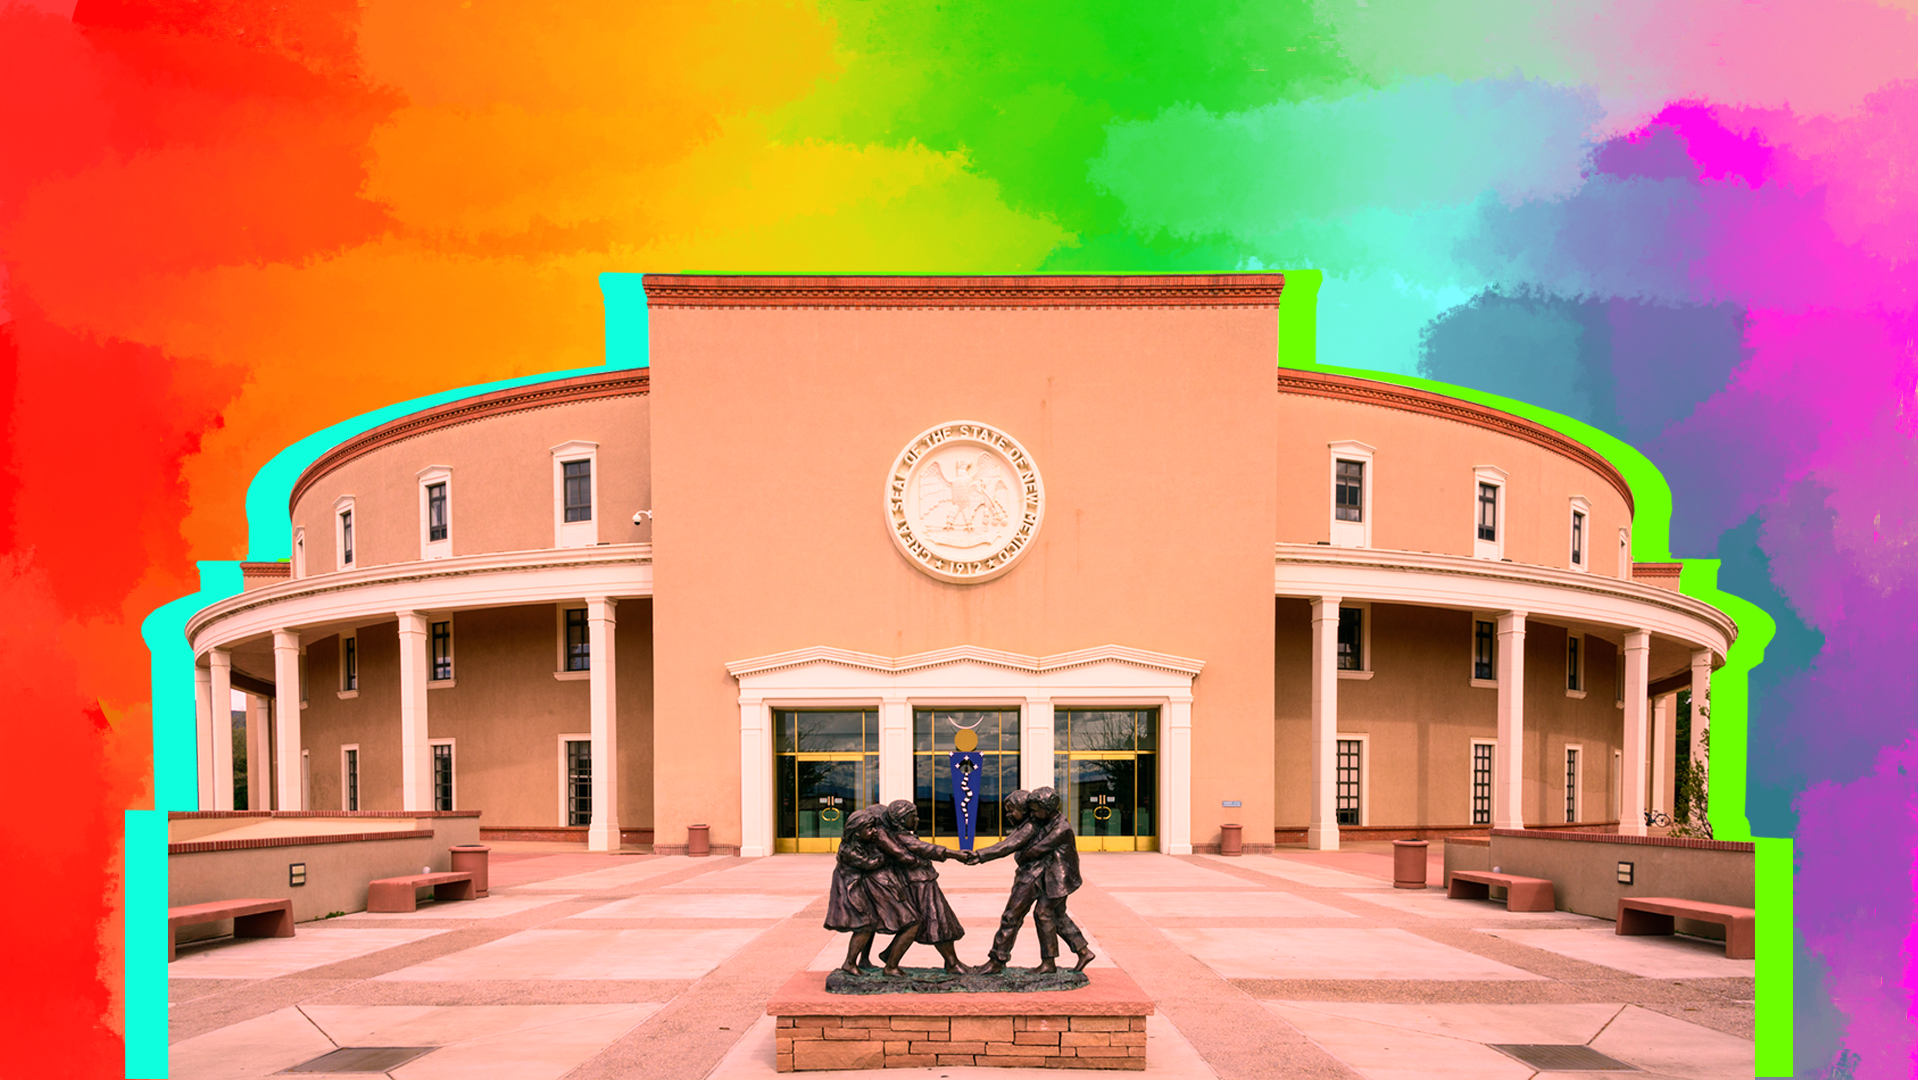 Photo of the NM Roundhouse in Santa Fe with brightly colored rainbow graphic backgrund.